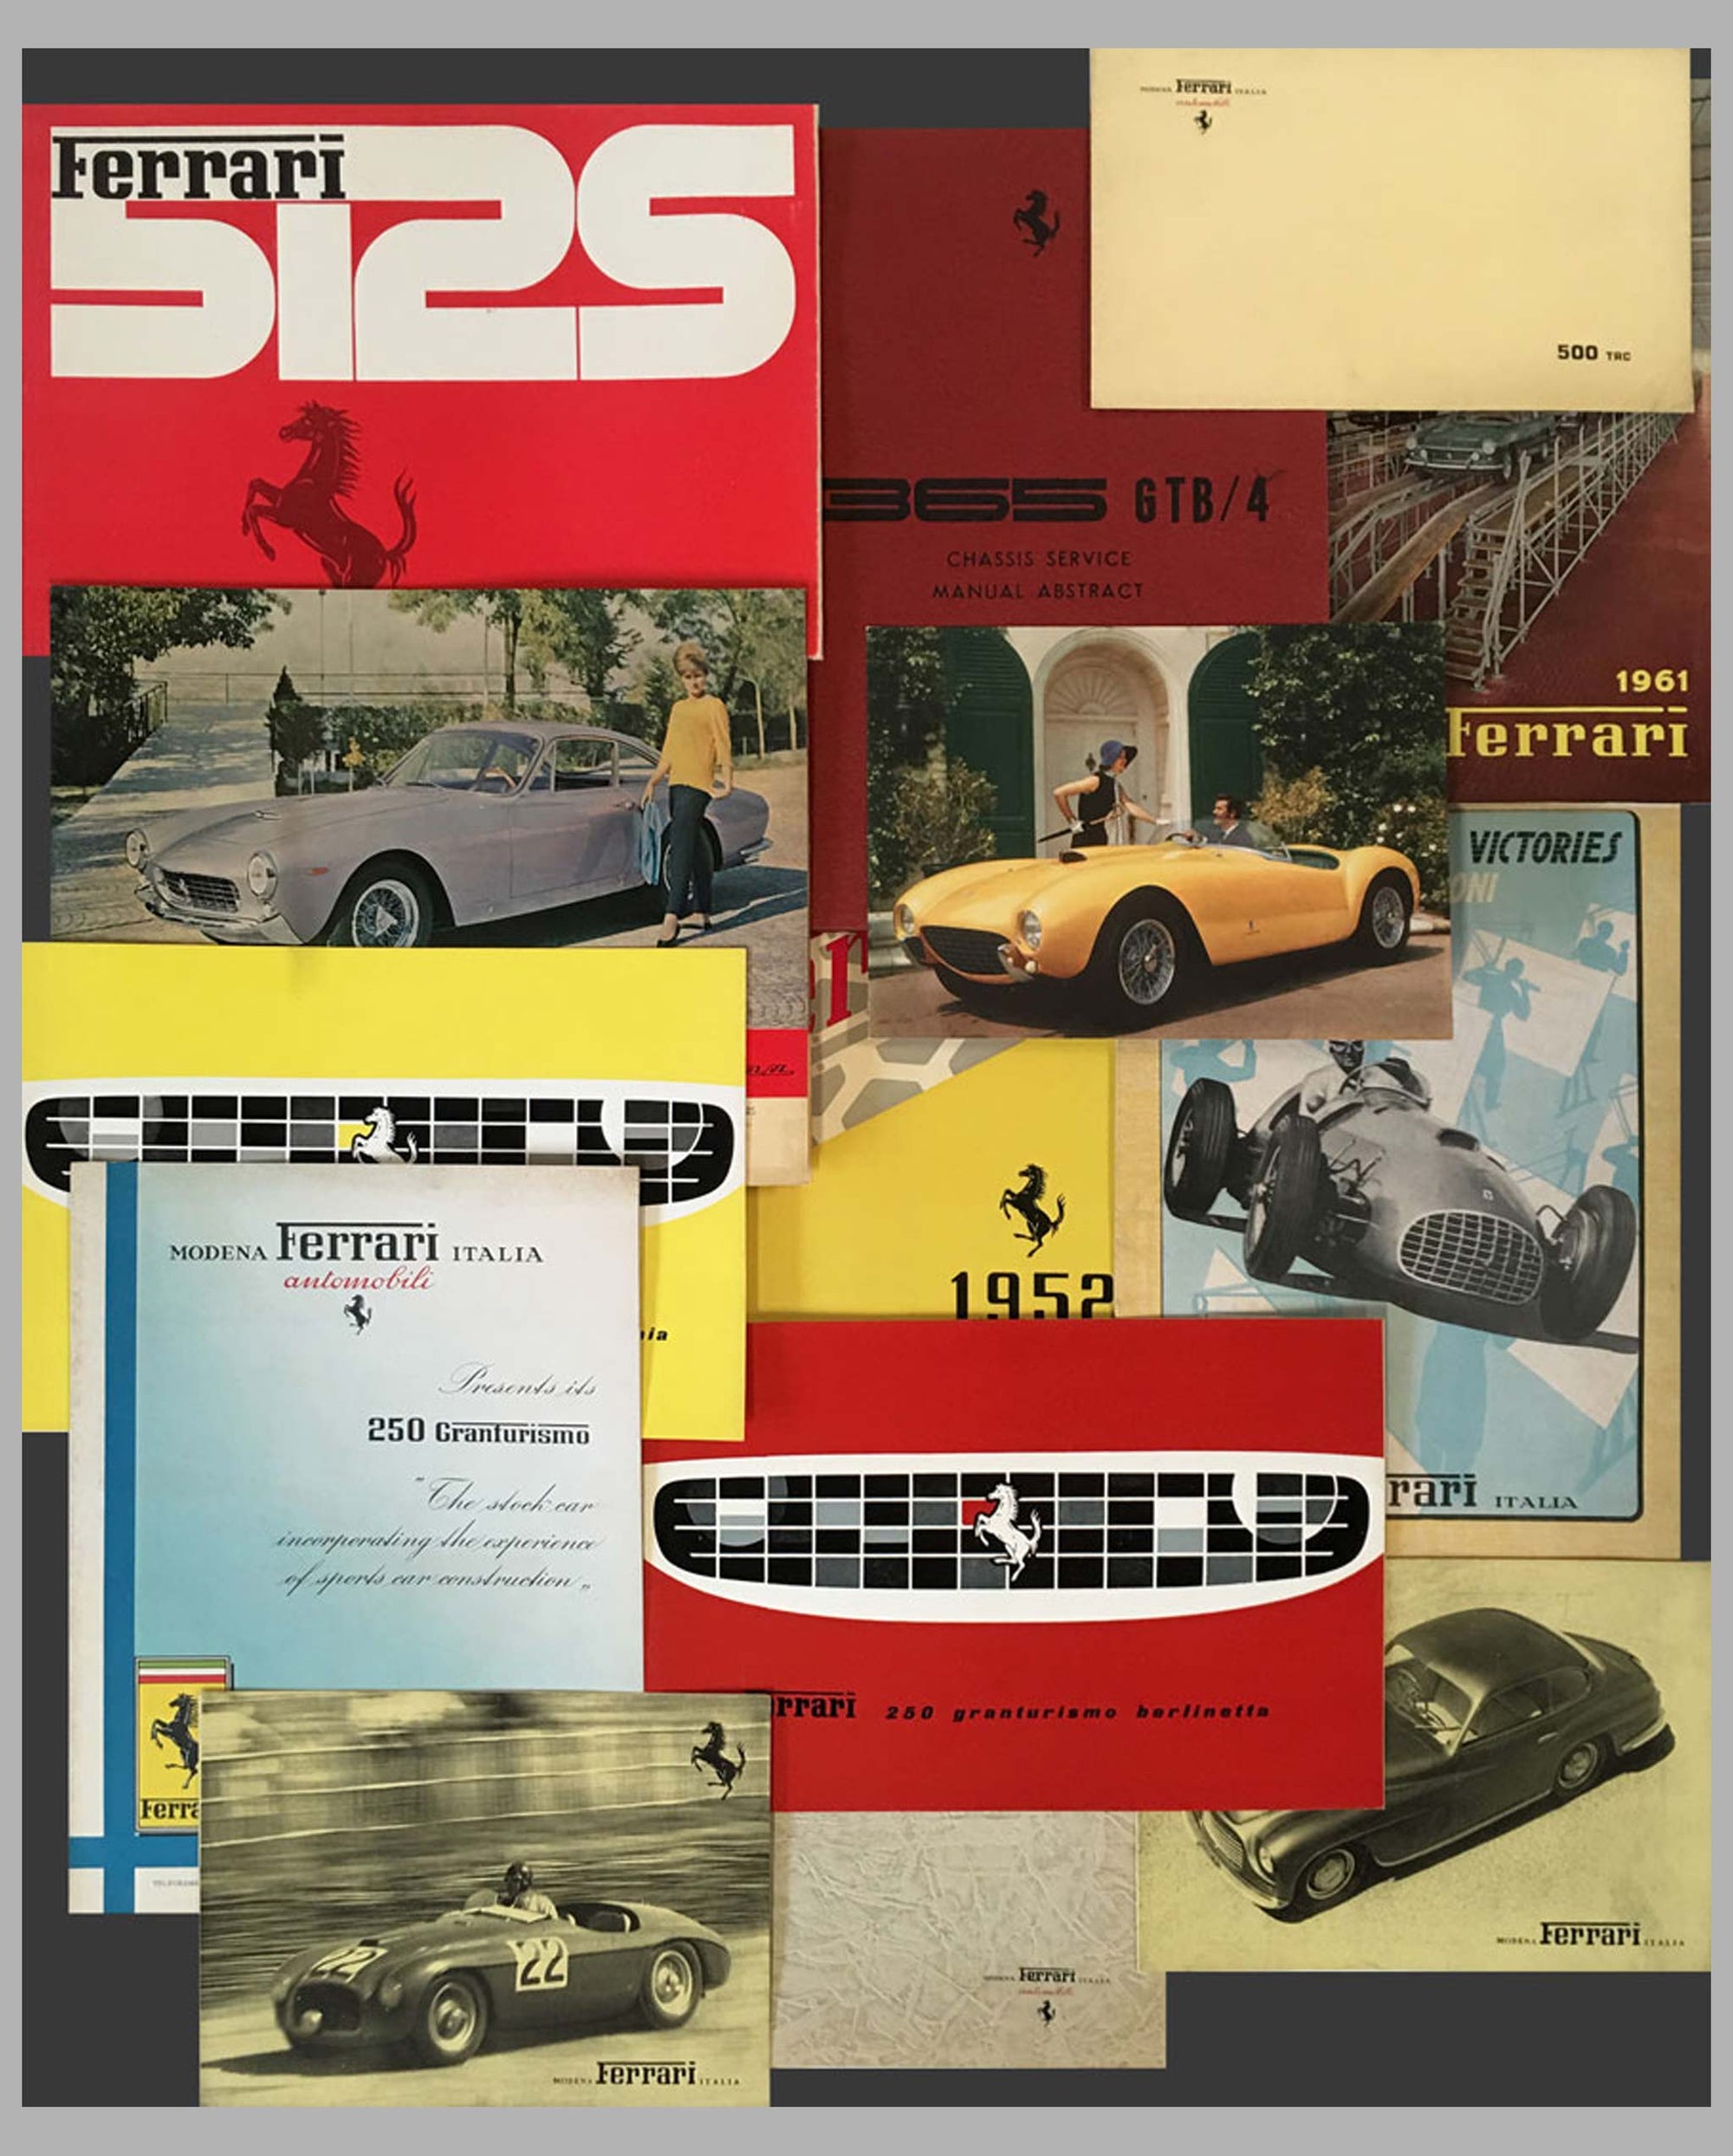 Ferrari Vintage Literature - Many more not listed available, ask for details or send us your request<br><span style="color: #ff0000;">Contact Us</span>